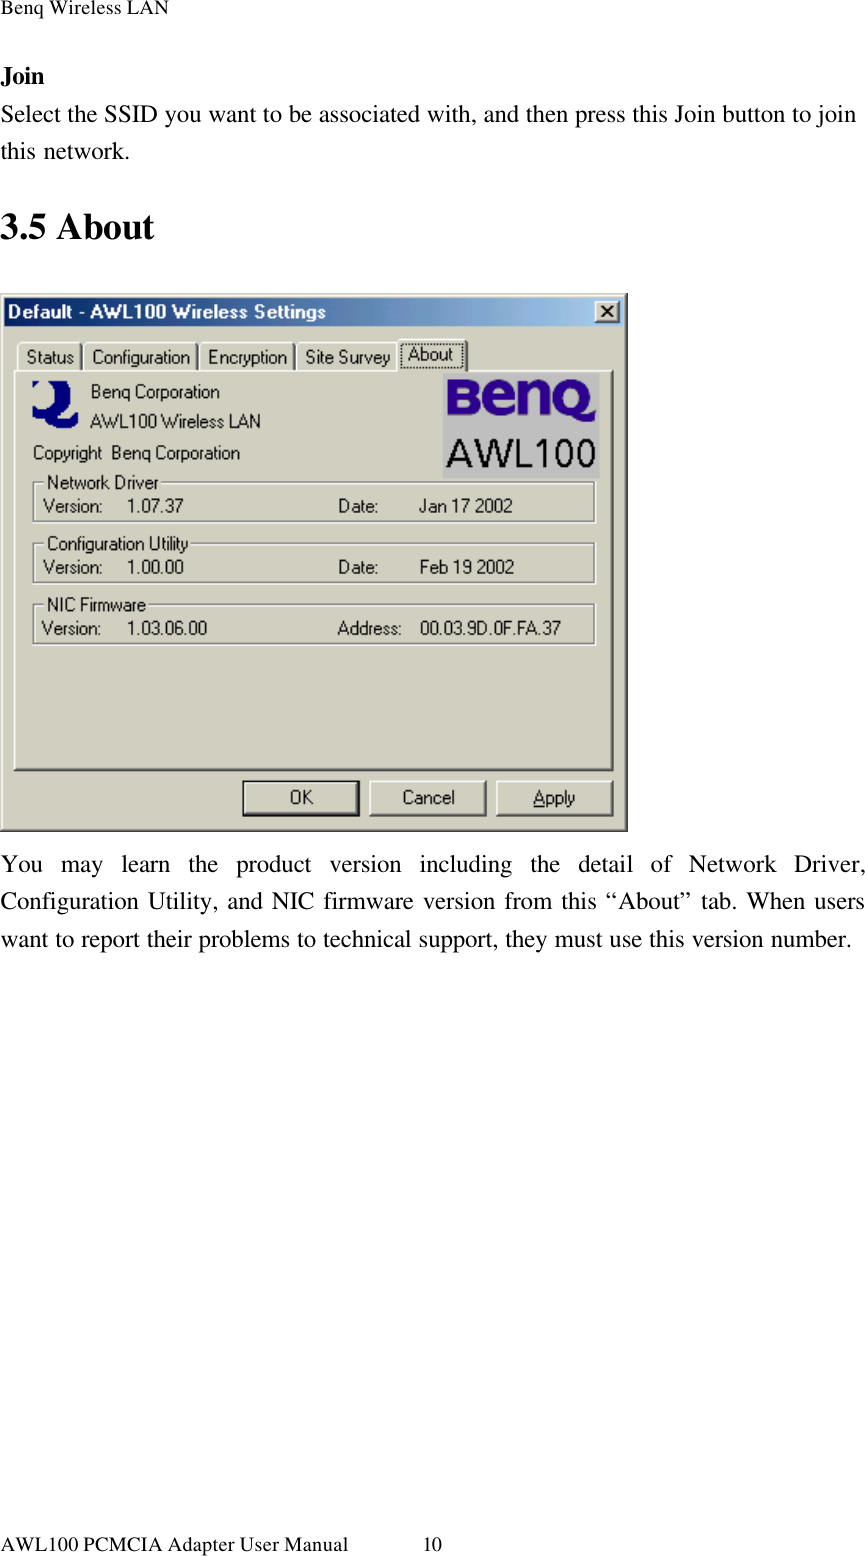 Benq Wireless LAN AWL100 PCMCIA Adapter User Manual 10 Join Select the SSID you want to be associated with, and then press this Join button to join this network. 3.5 About  You may learn the product version including the detail of Network Driver, Configuration Utility, and NIC firmware version from this “About” tab. When users want to report their problems to technical support, they must use this version number.  